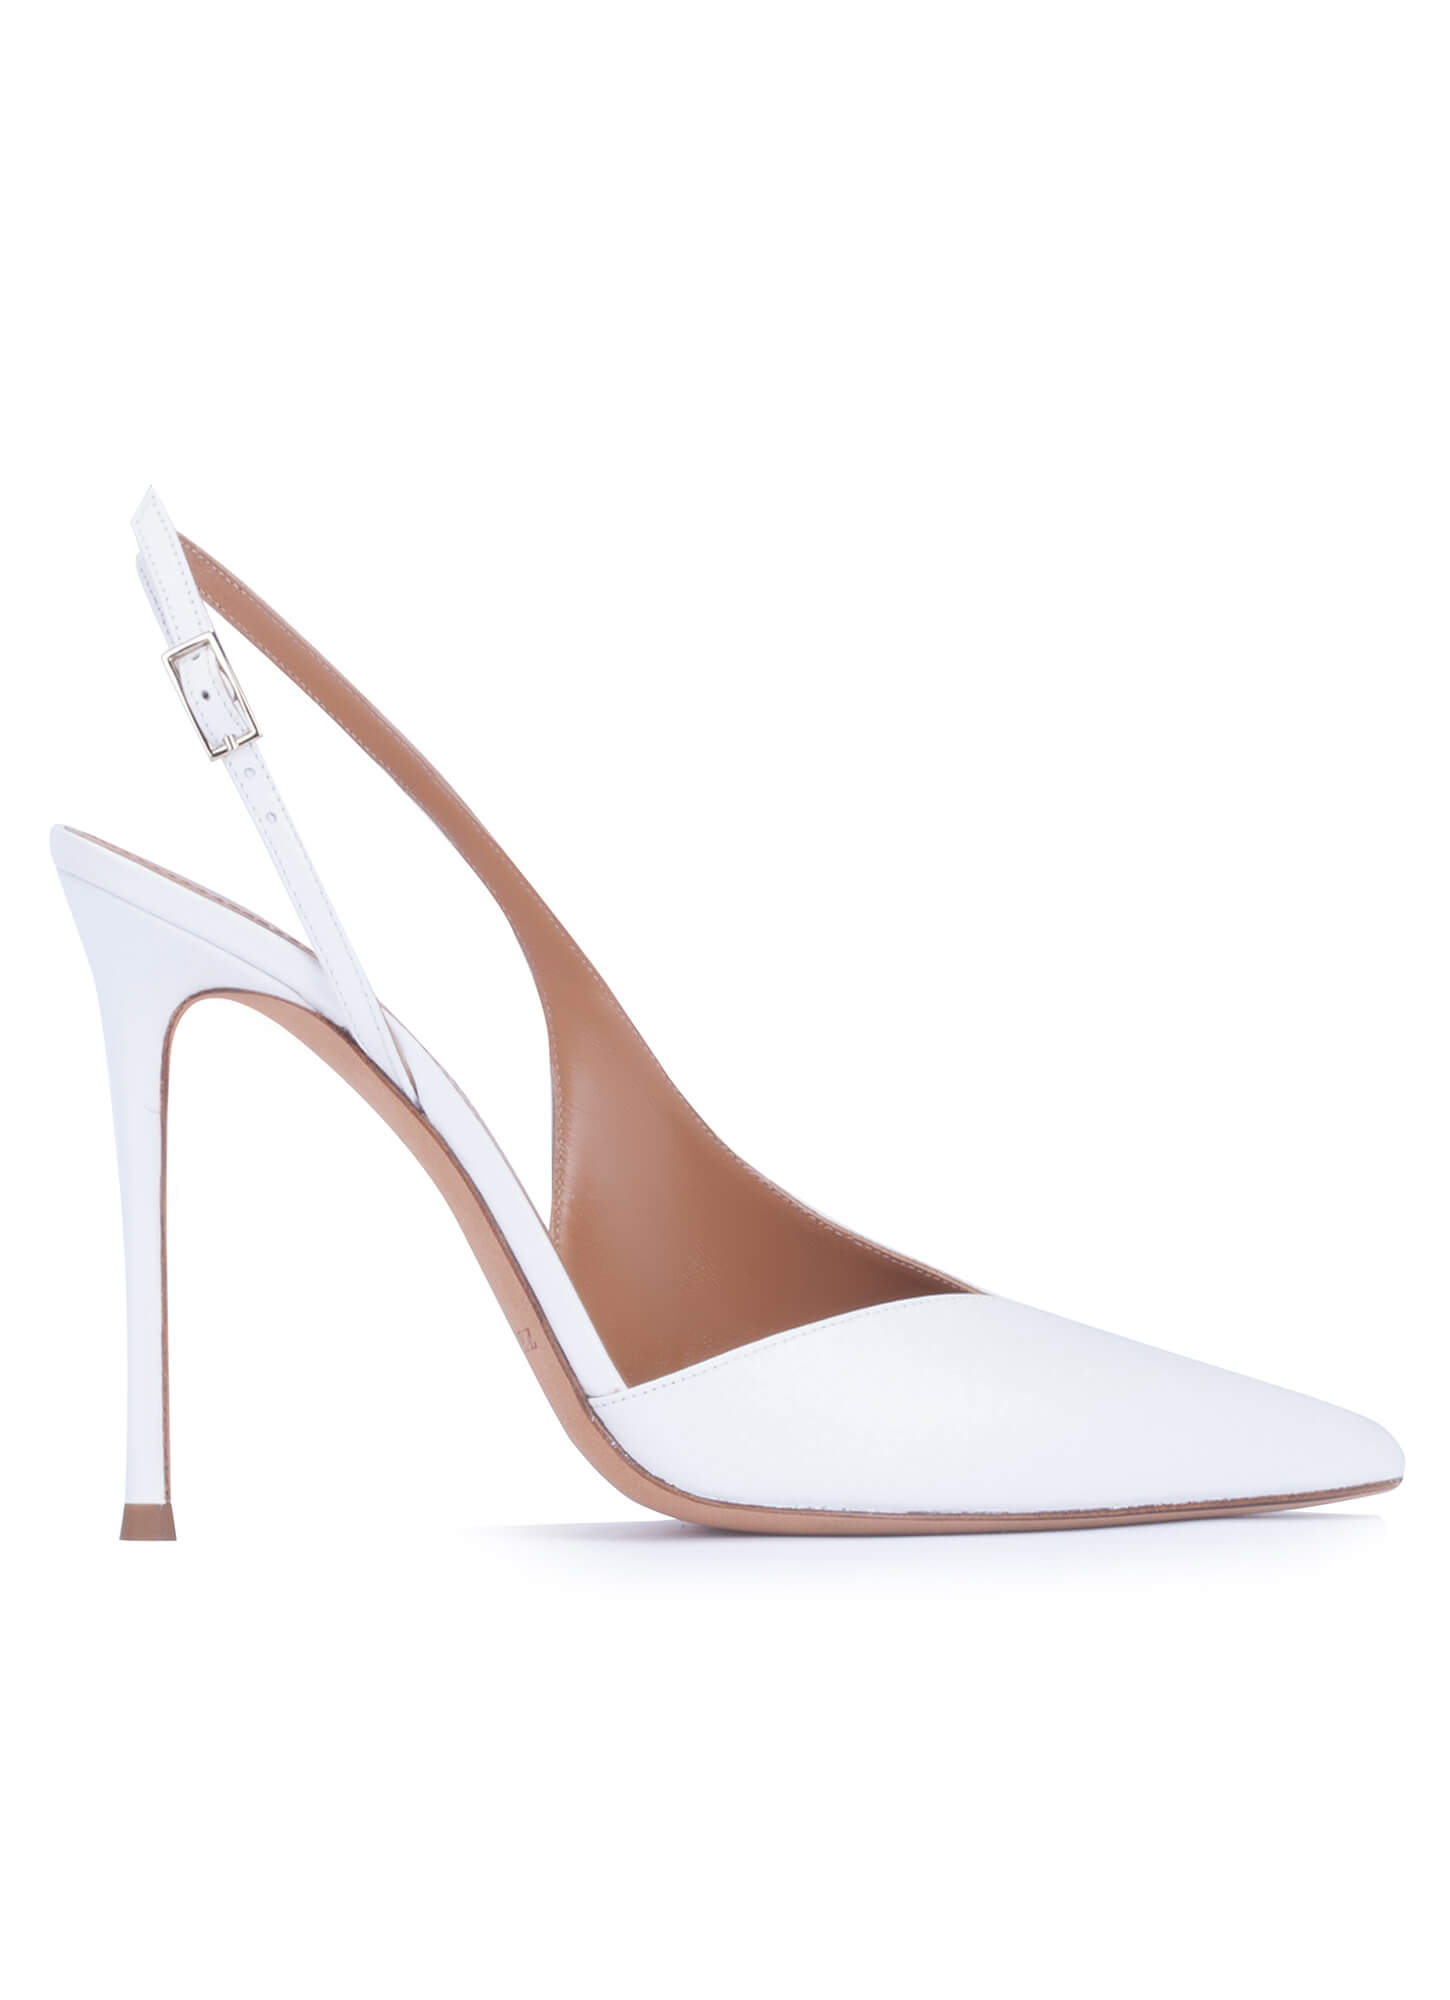 Asymmetric heeled slingback pumps in white calf leather . PURA LOPEZ